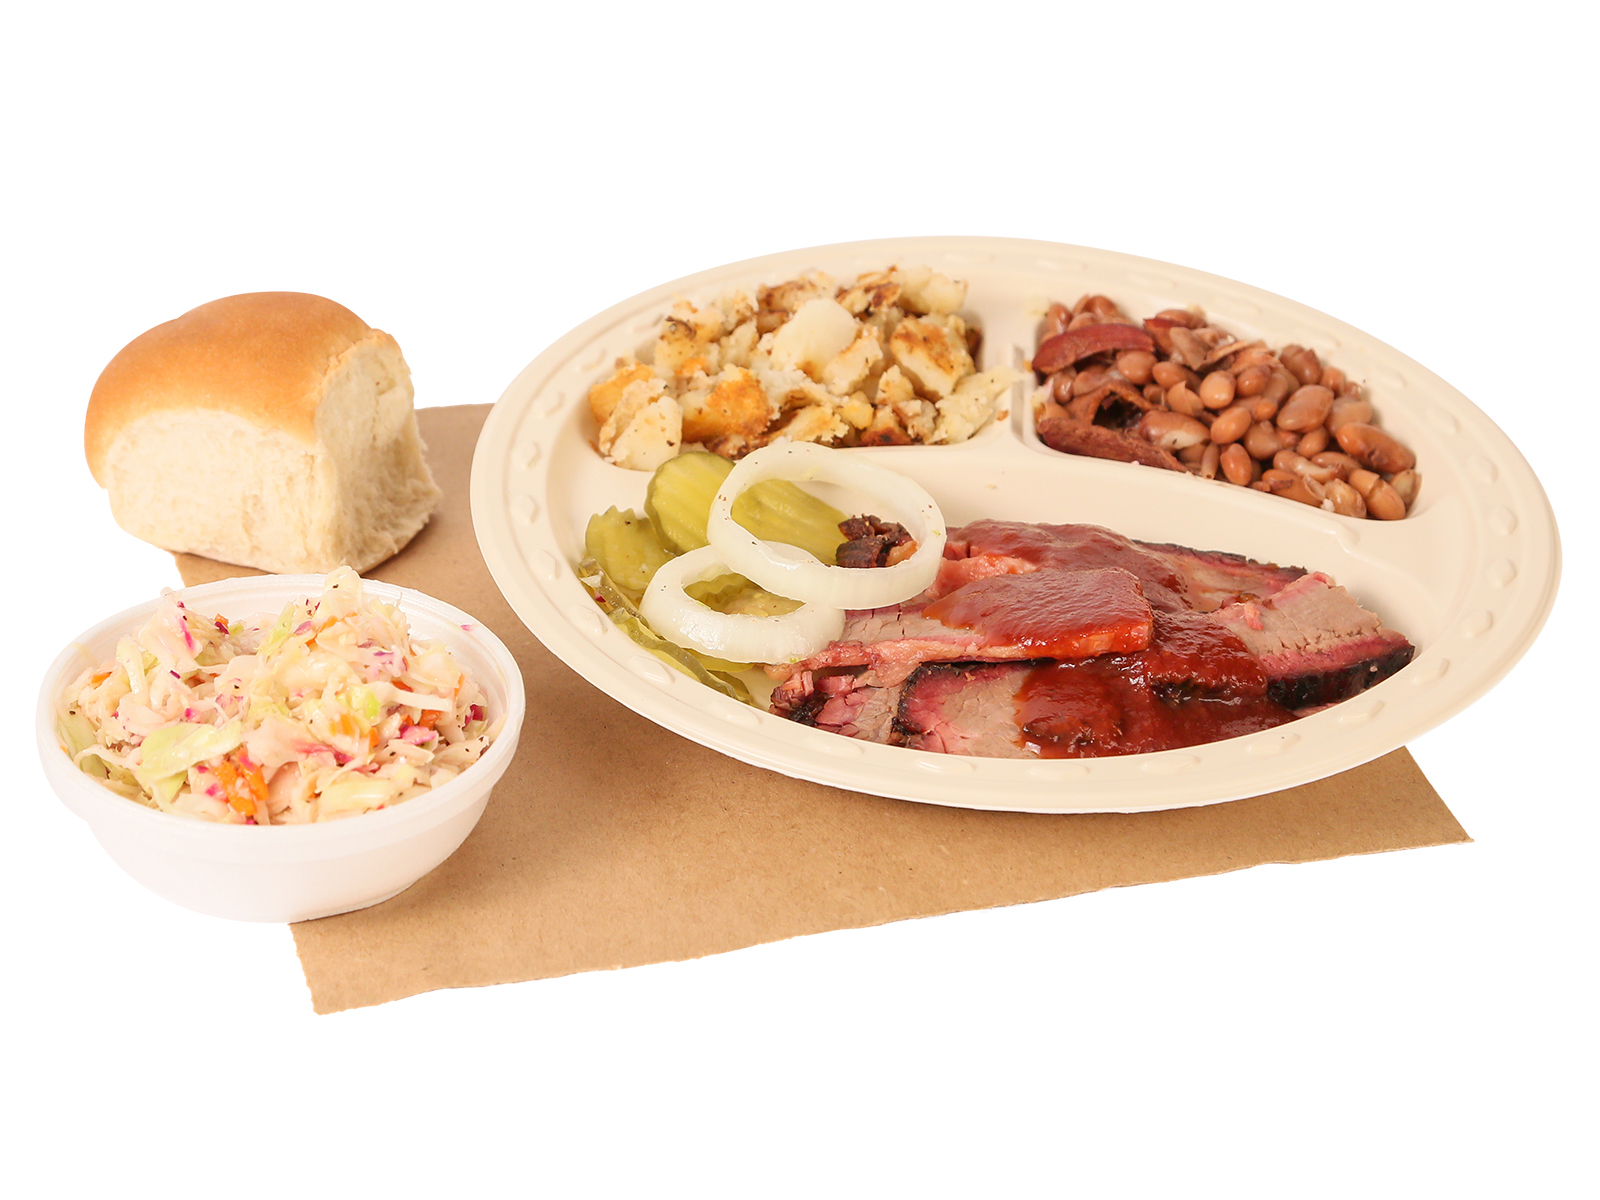 BBQ Regular Plate served with brisket, pinto beans, hashbrowns, coleslaw, dinner roll, BBQ sauce, pickles, & onions